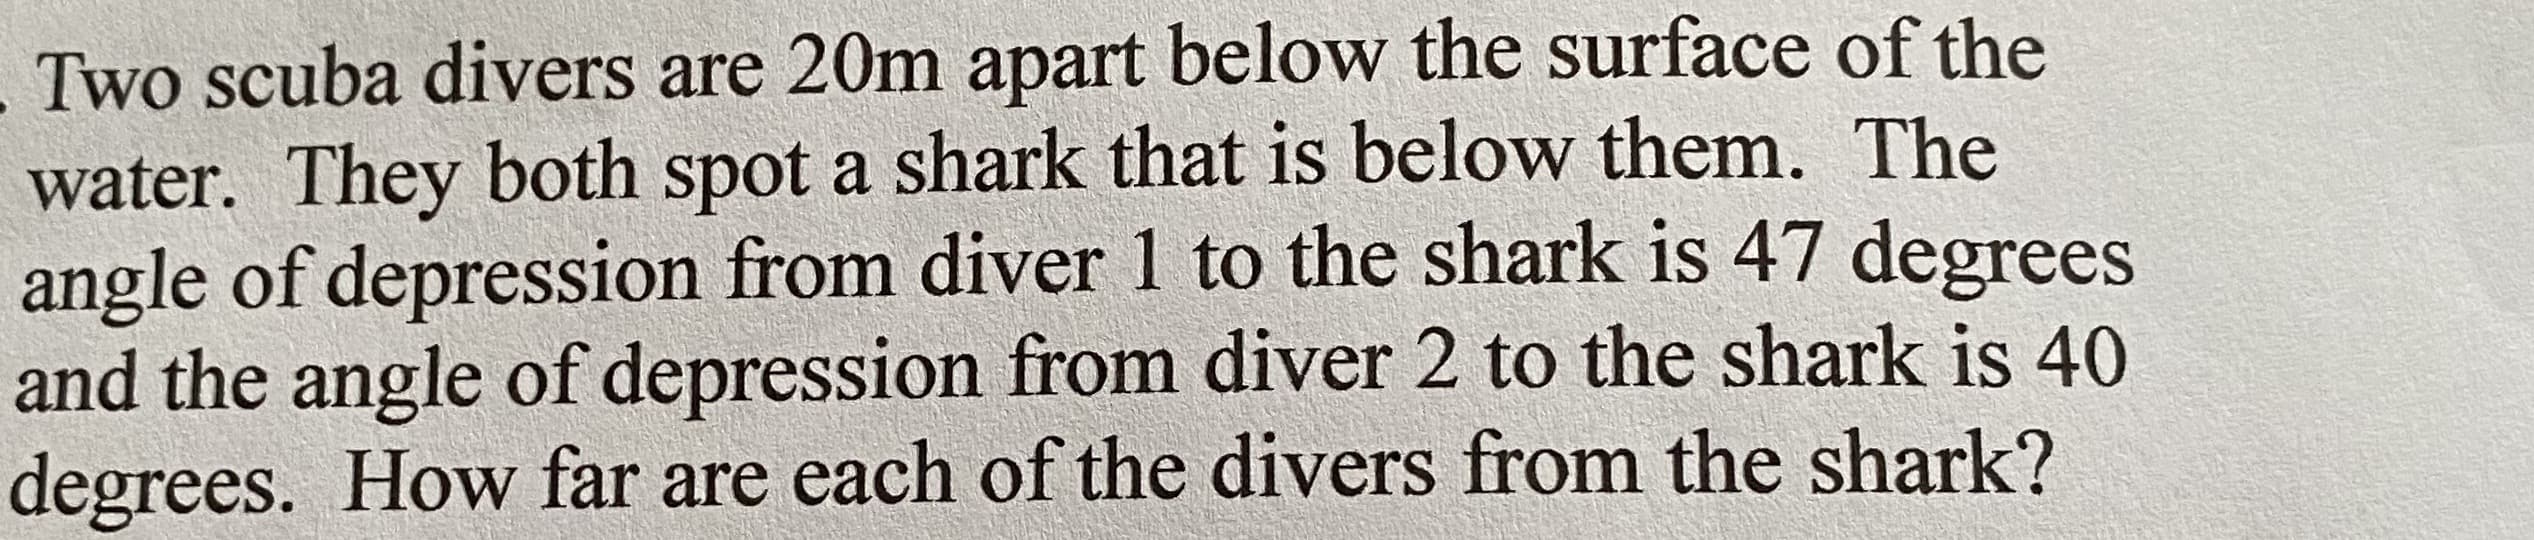 Two scuba divers are 20m apart below the surface of the
water. They both spot a shark that is below them. The
angle of depression from diver 1 to the shark is 47 degrees
and the angle of depression from diver 2 to the shark is 40
degrees. How far are each of the divers from the shark?
